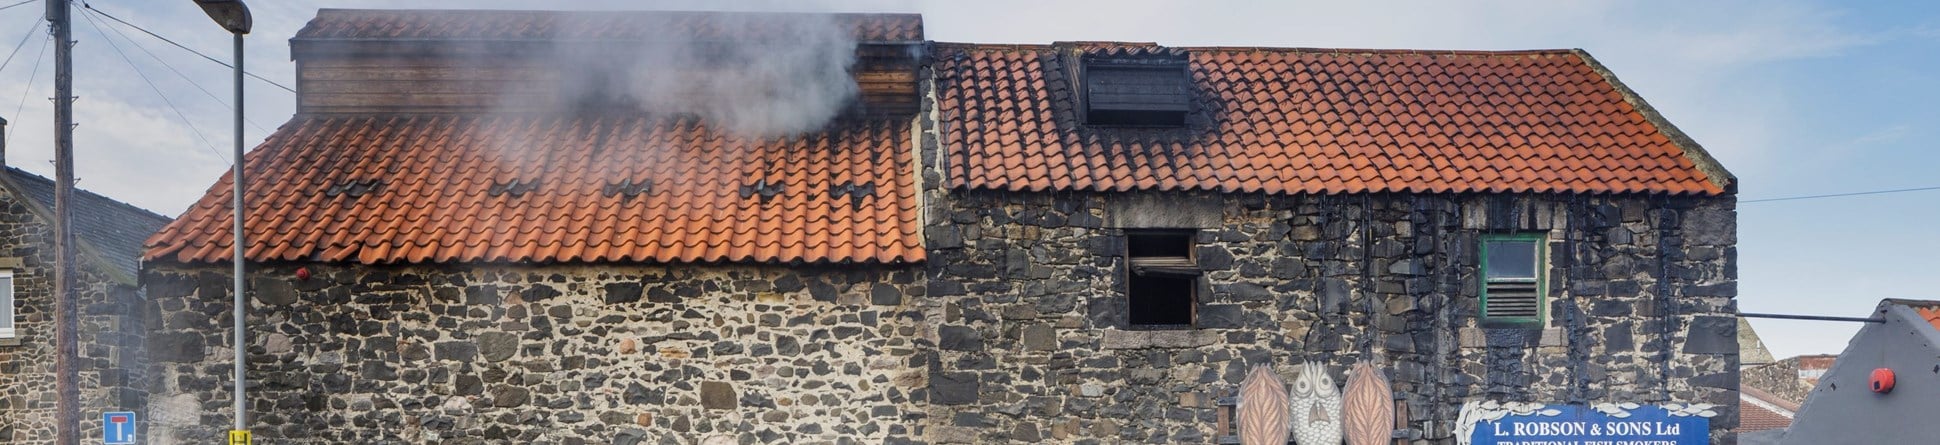 A stone building next to a road with smoke coming out of the roof.